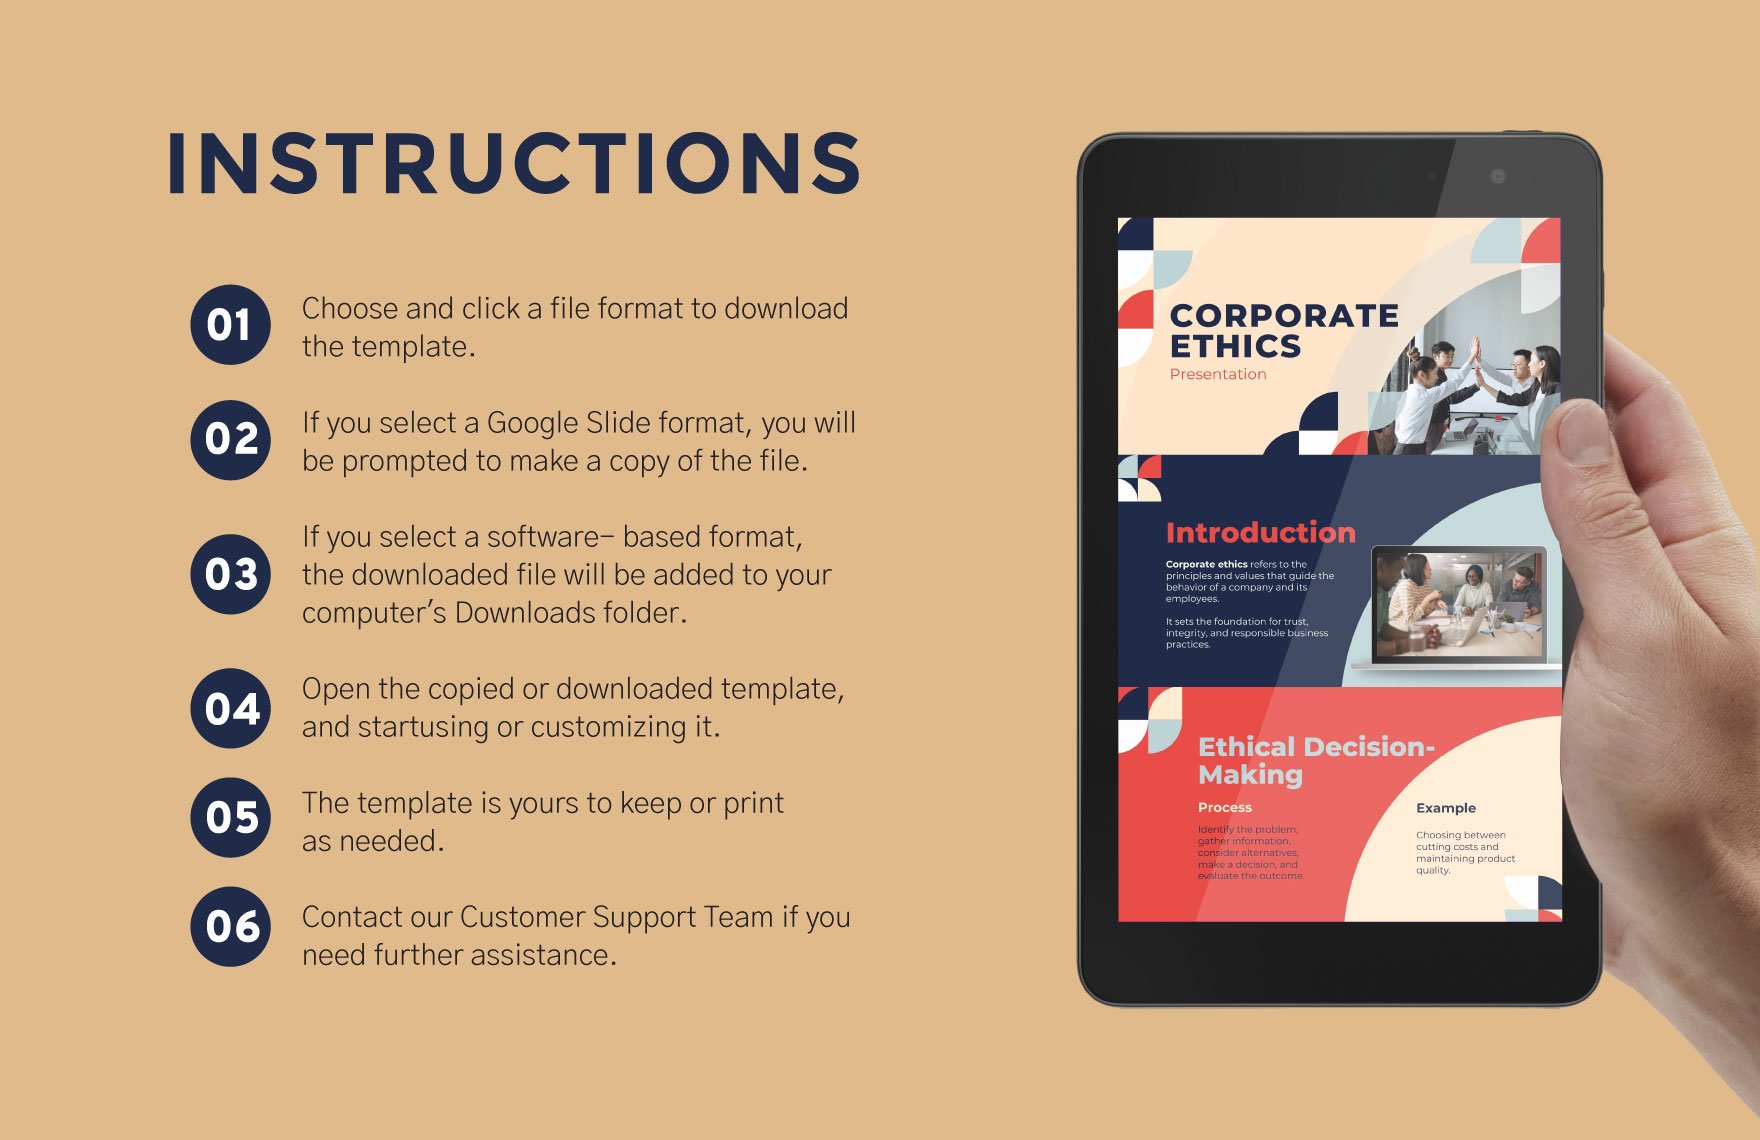 Corporate Ethics Template